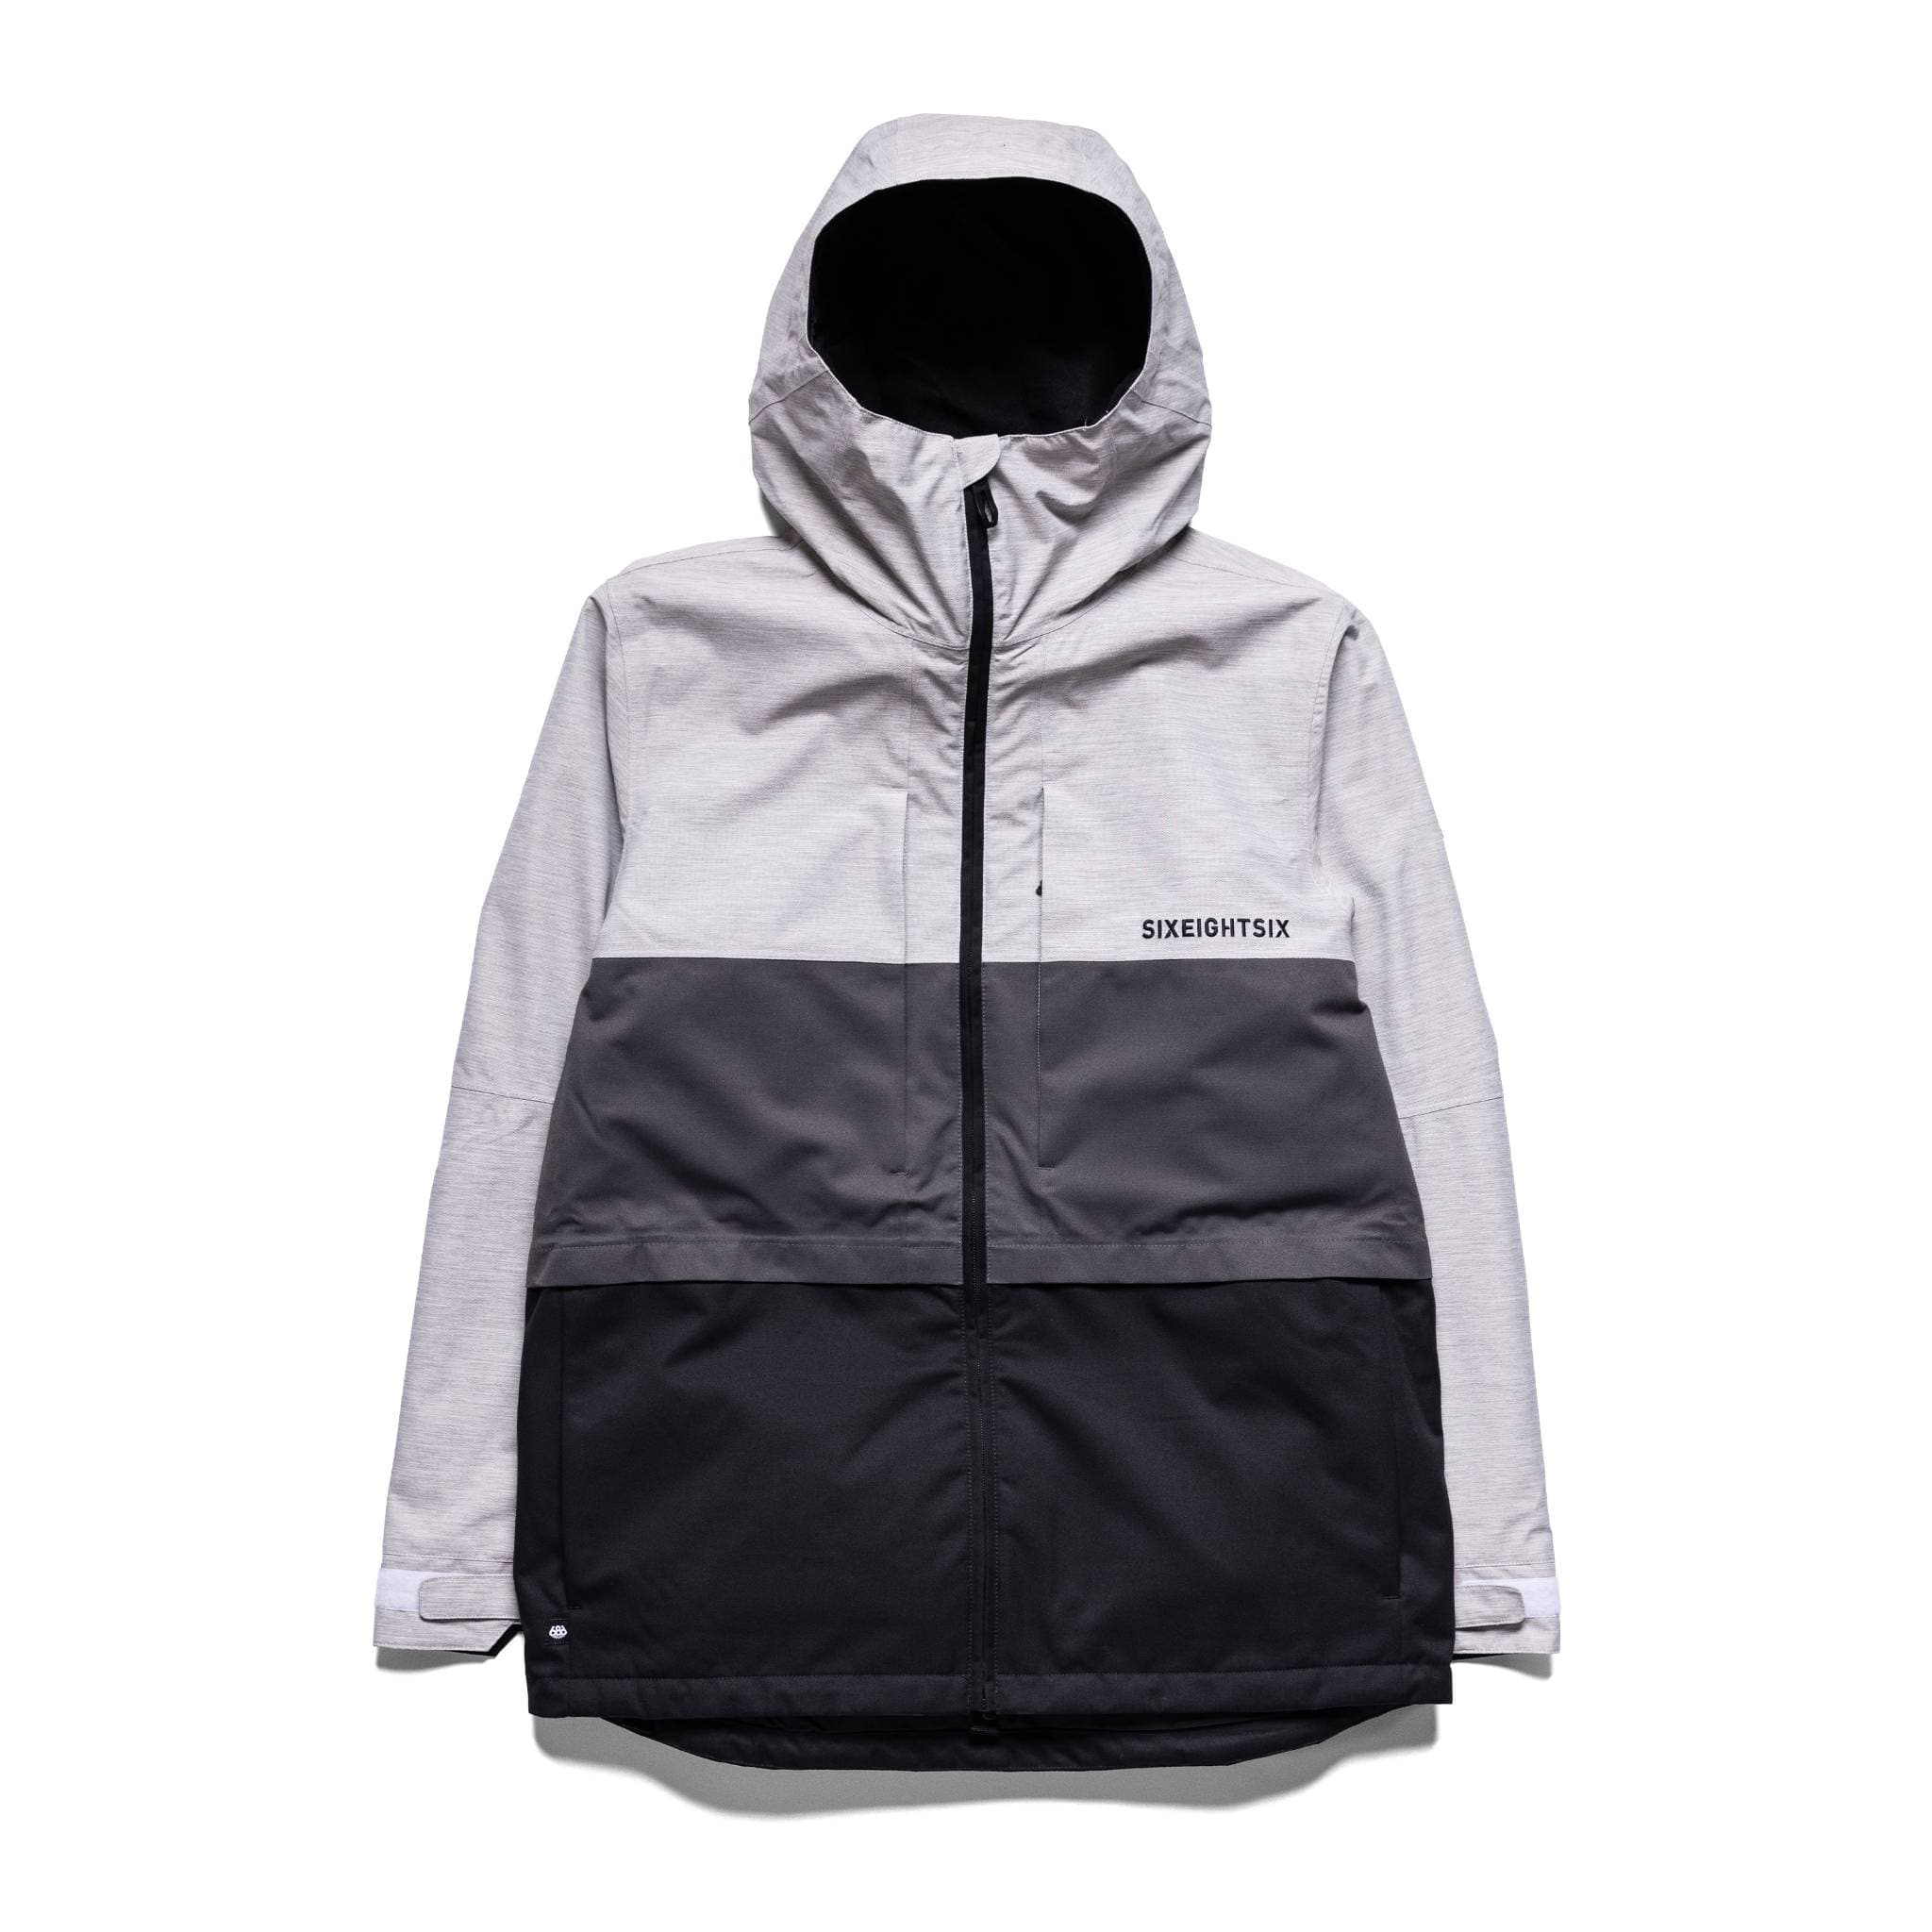 686 Smarty 3-In-1 Form Jacket